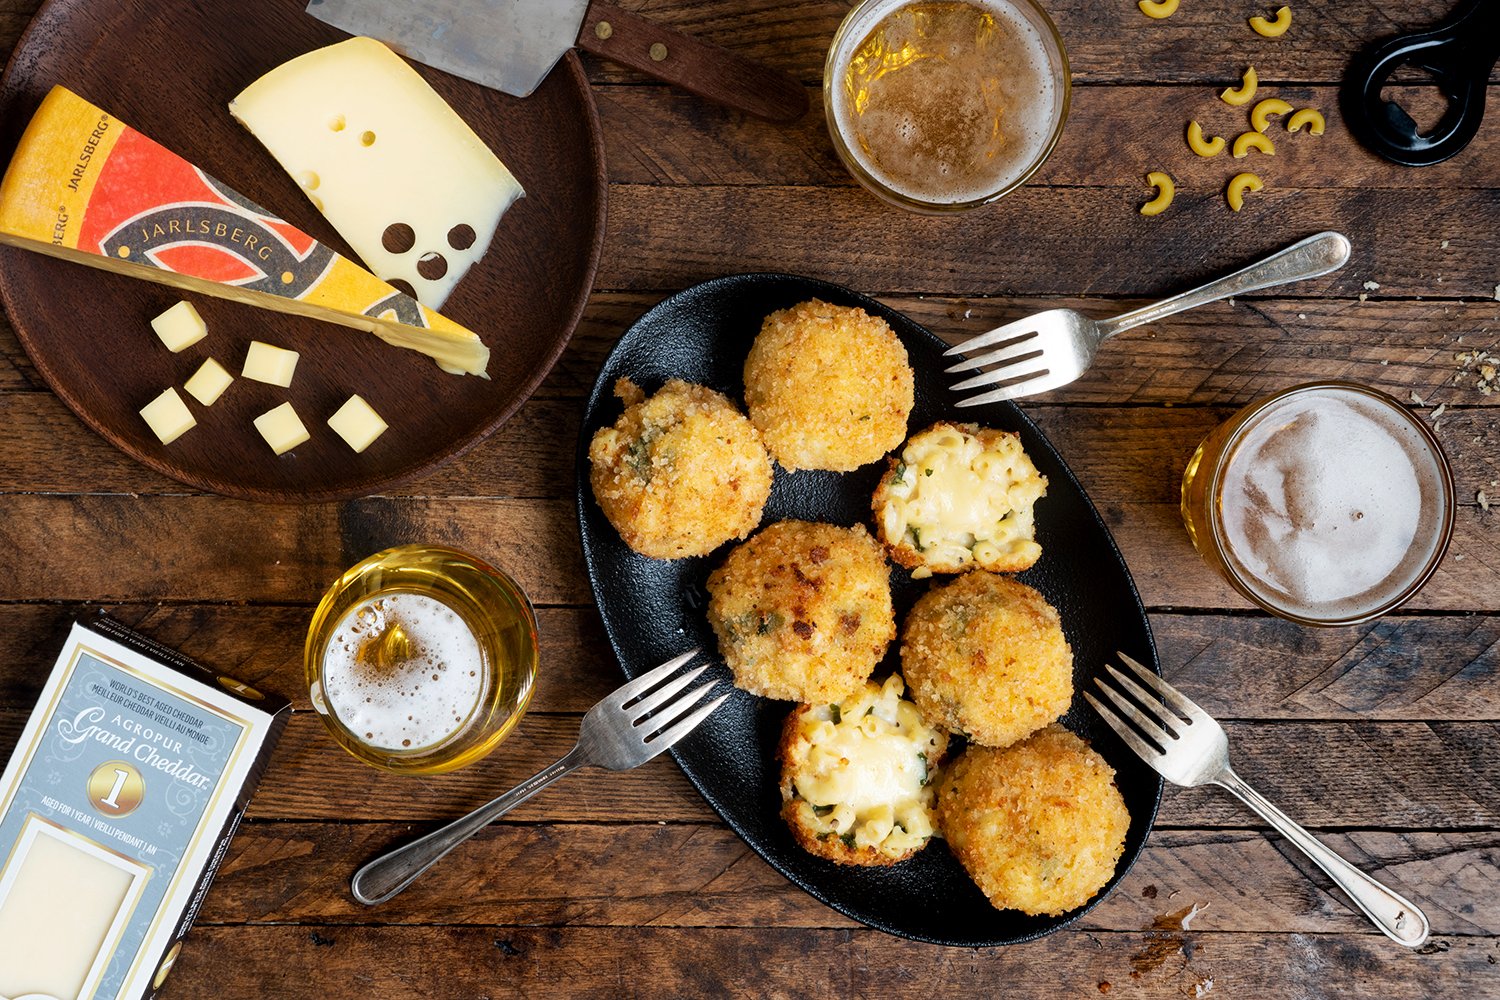 Recipe -  Fried Mac & Cheese balls with Agropur Grand Cheddar and Jarlsberg